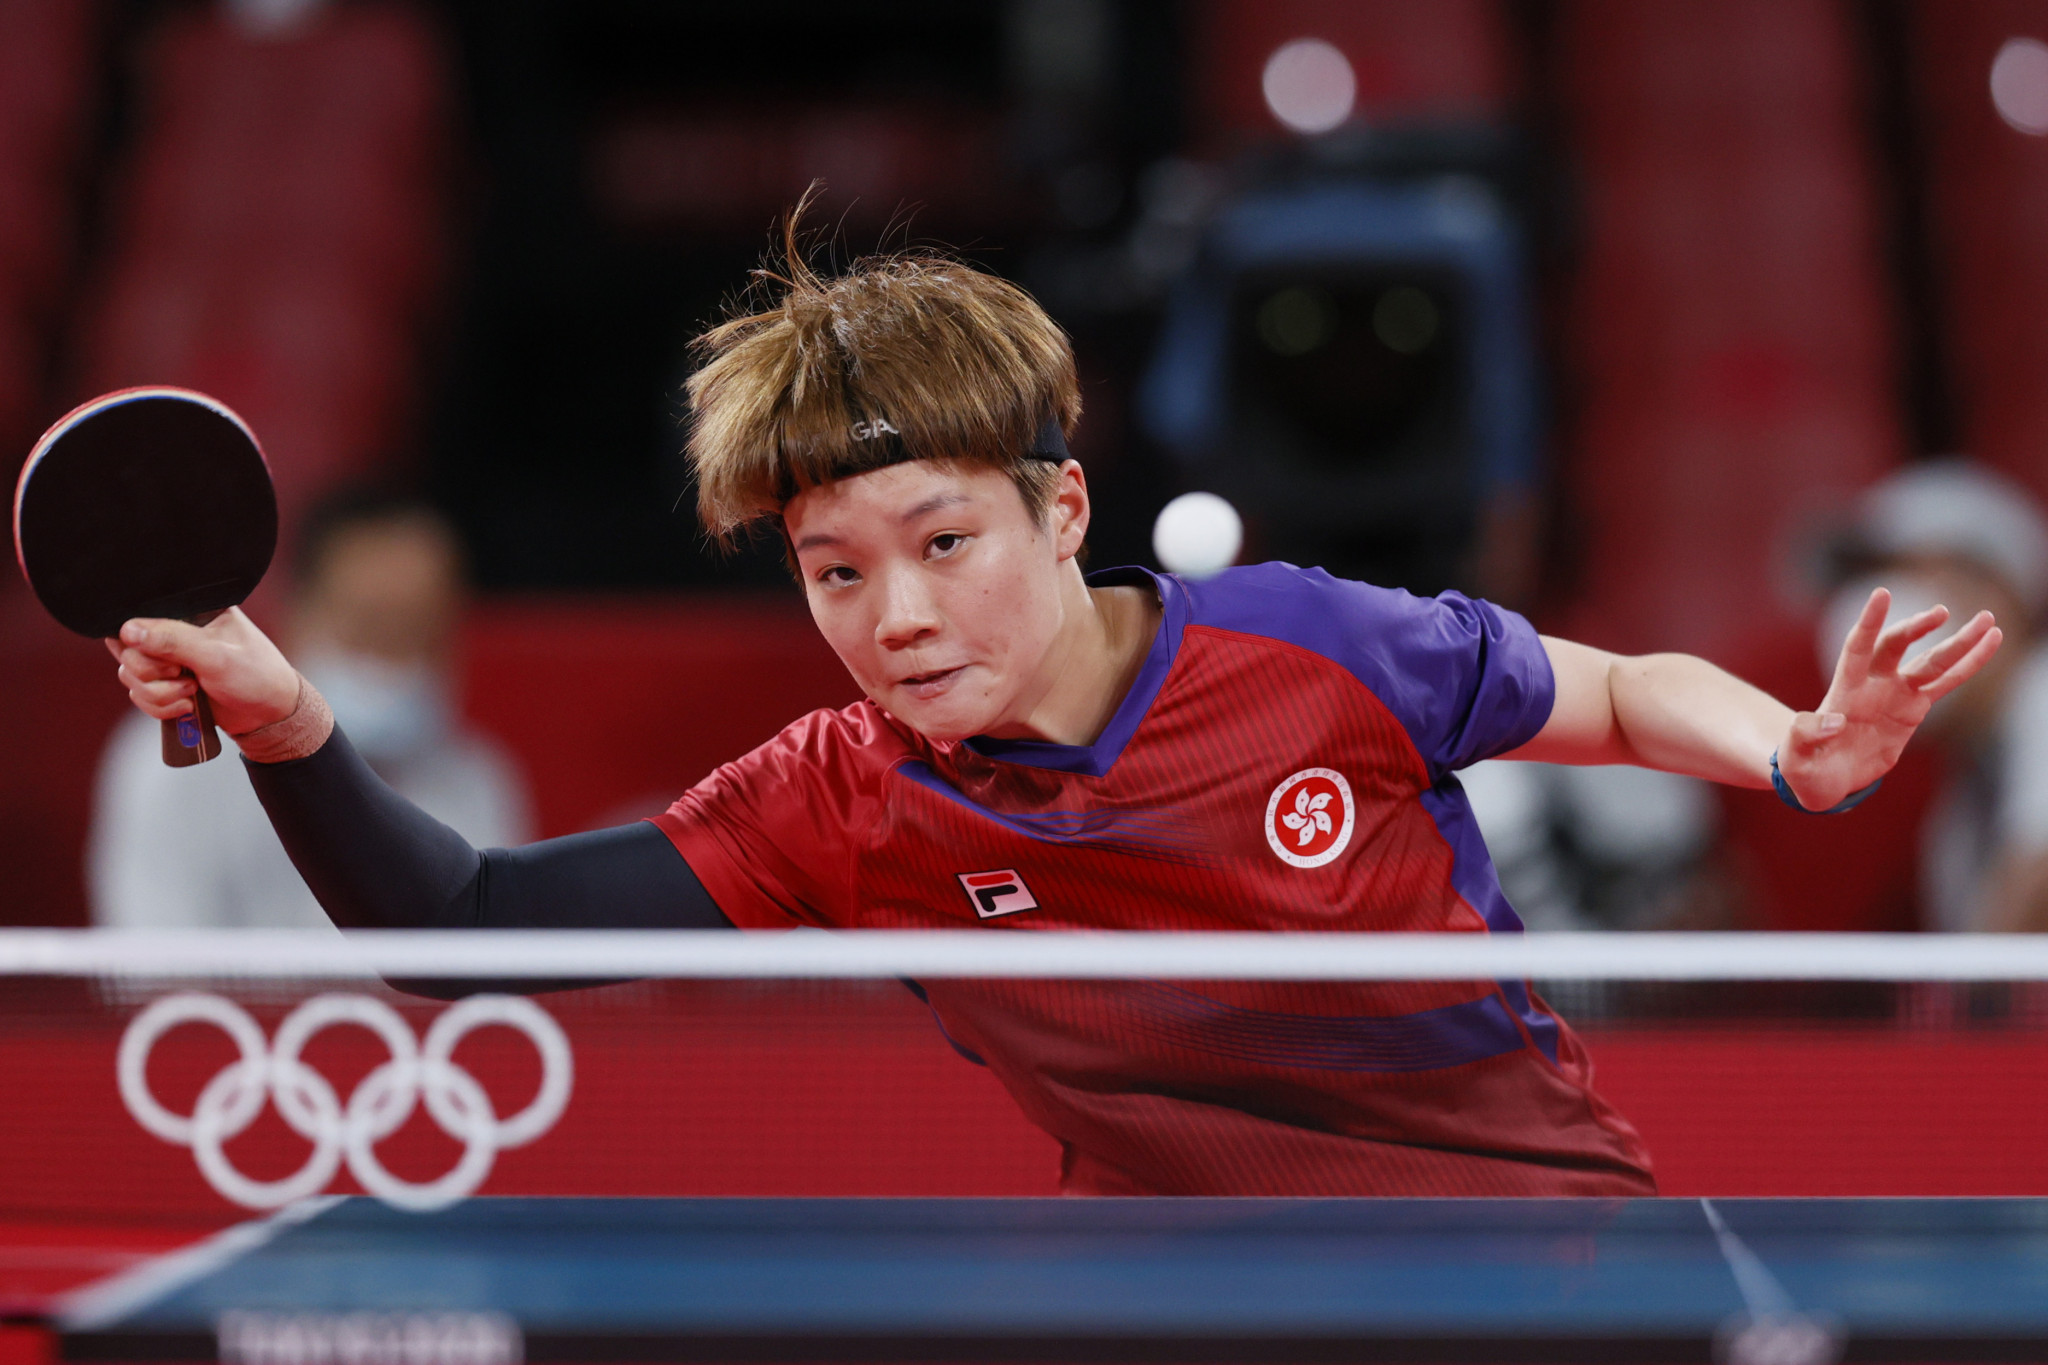 Top seeds all advance to semi-finals of team events at Asian Table Tennis Championships